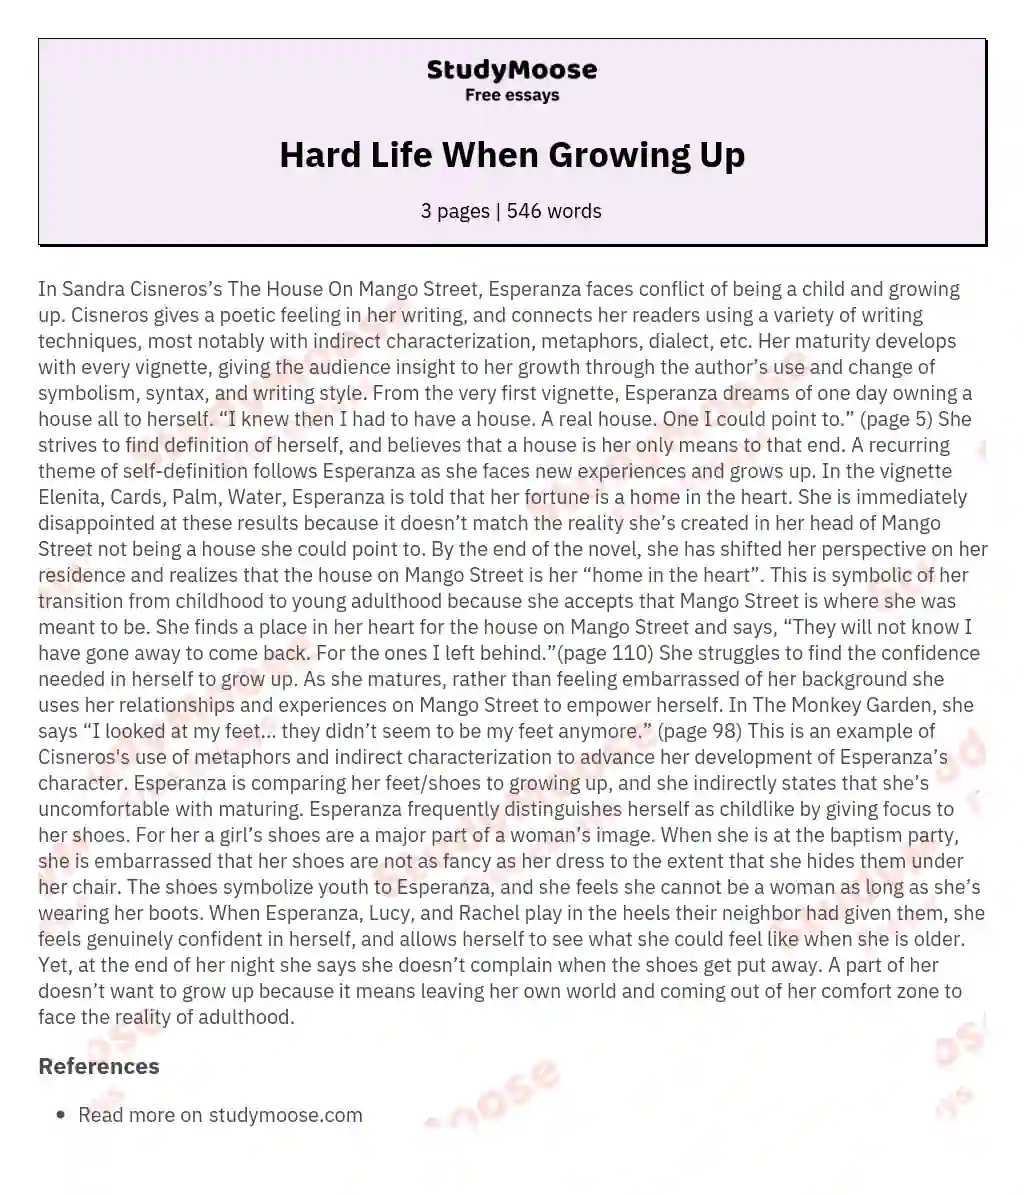 Hard Life When Growing Up essay